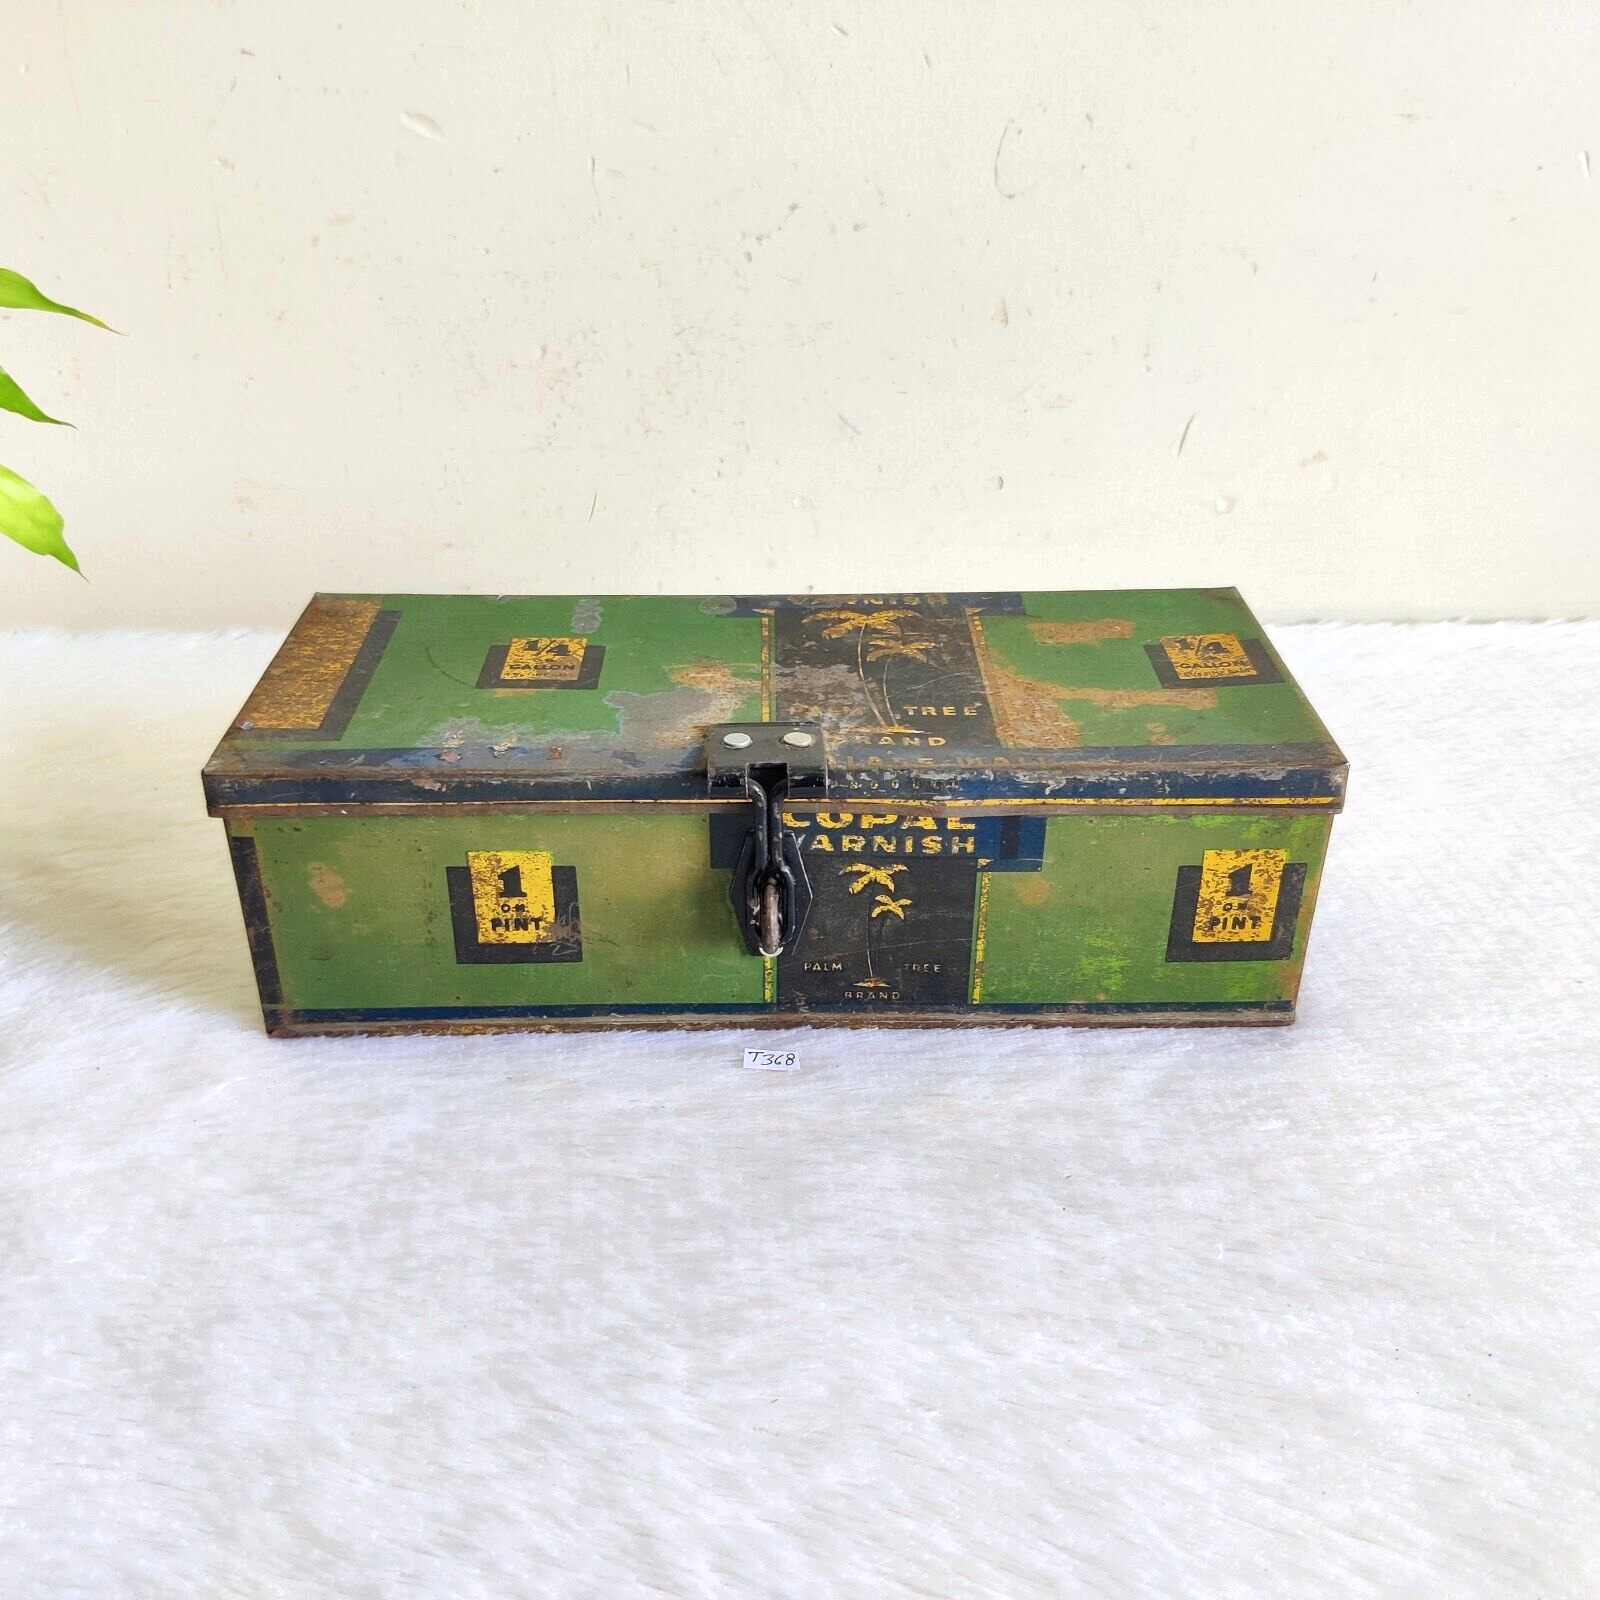 1940s Vintage Palm Tree Brand Copal Varnish Advertising Tin Box Collectible T368